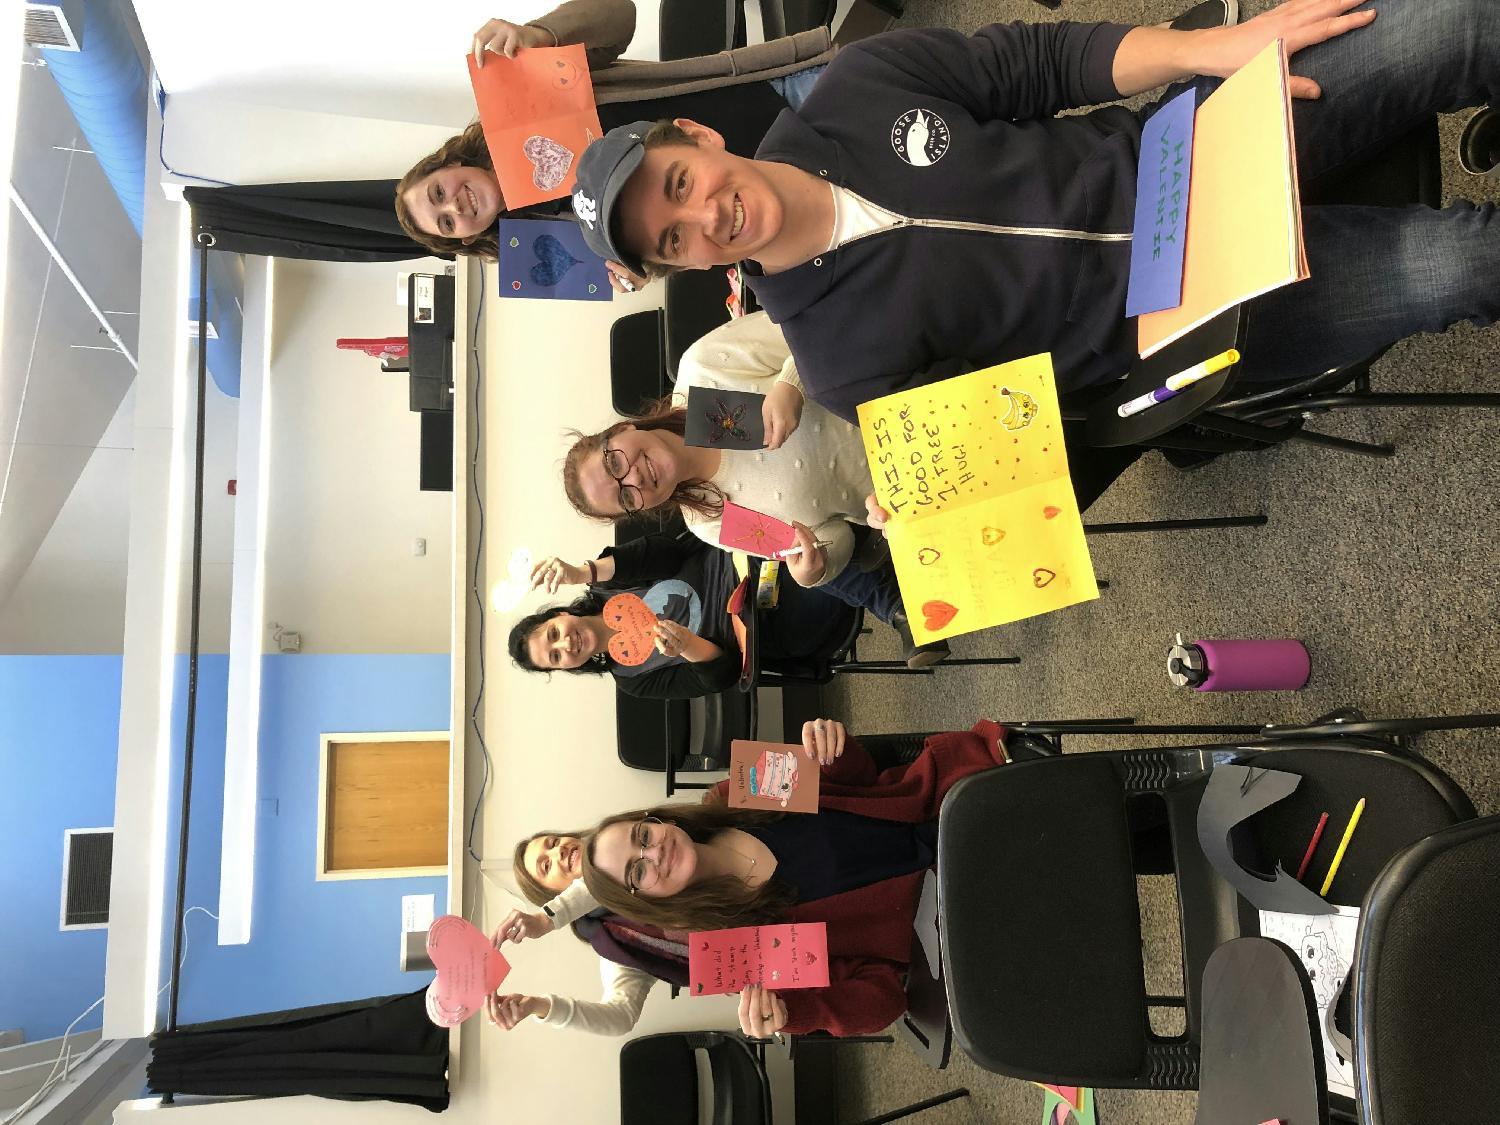 Each MLK Day, we participate in a half day of service. Volunteer activities take place in and outside of the office. The team pictured here created cards for residents at a local nursing home.